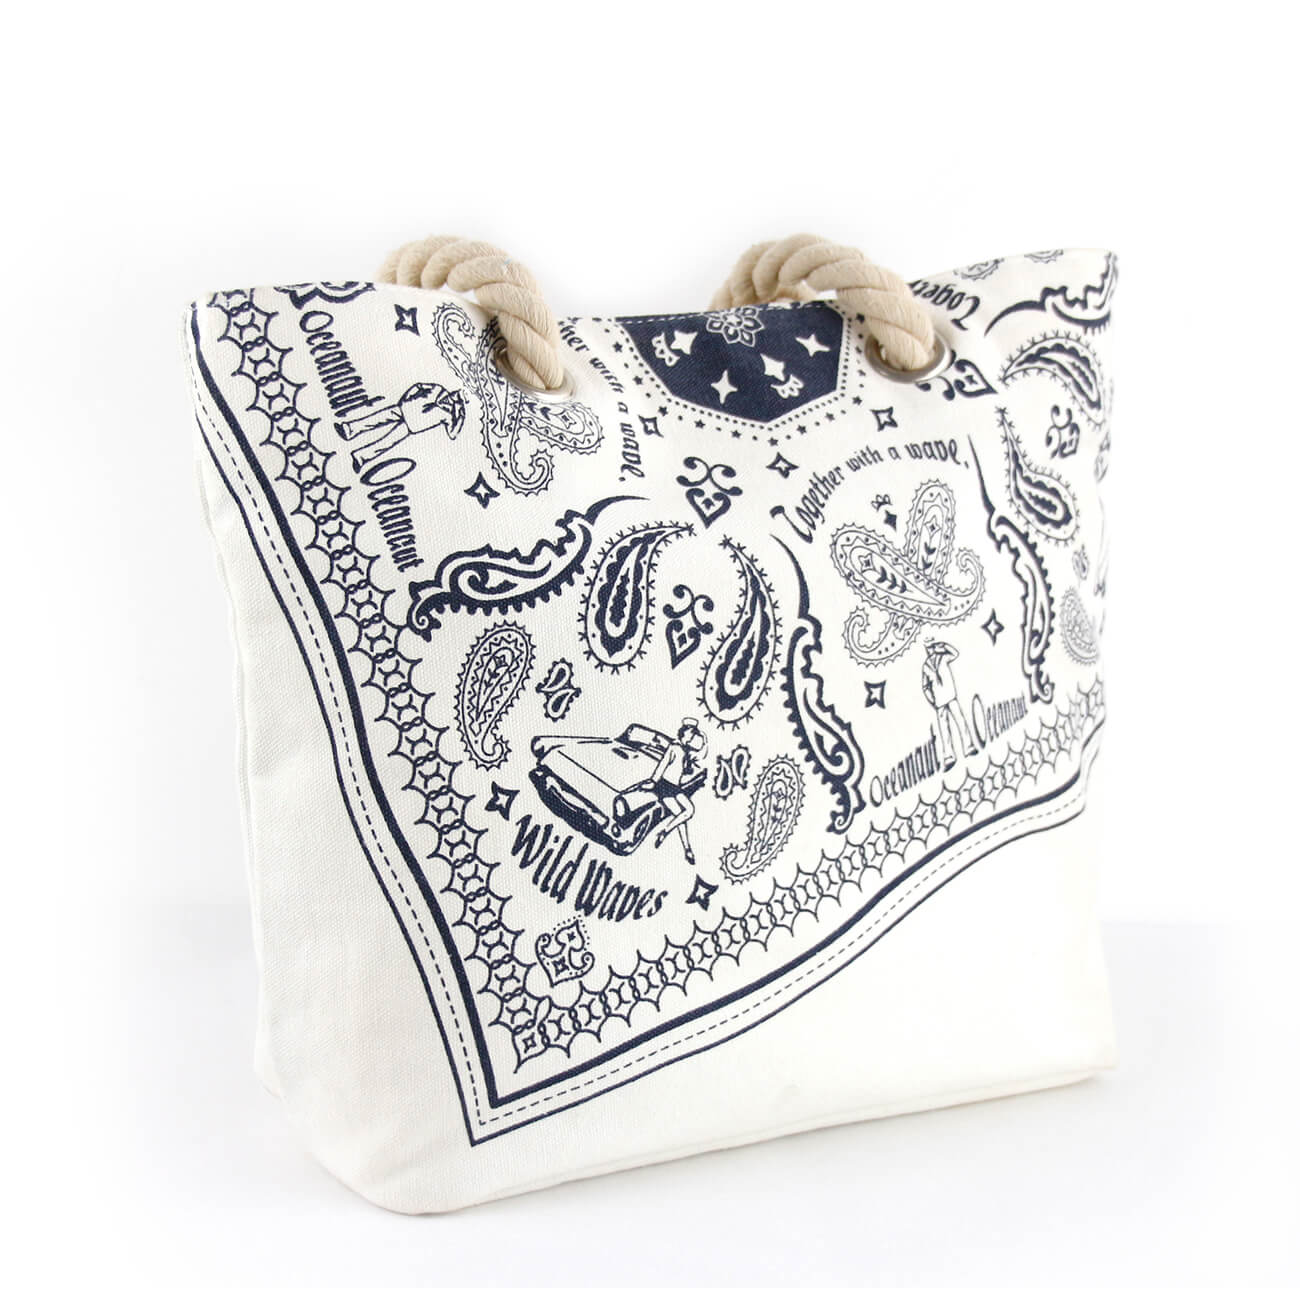 Custom Promotional Cotton Tote Bags with cotton rope handles